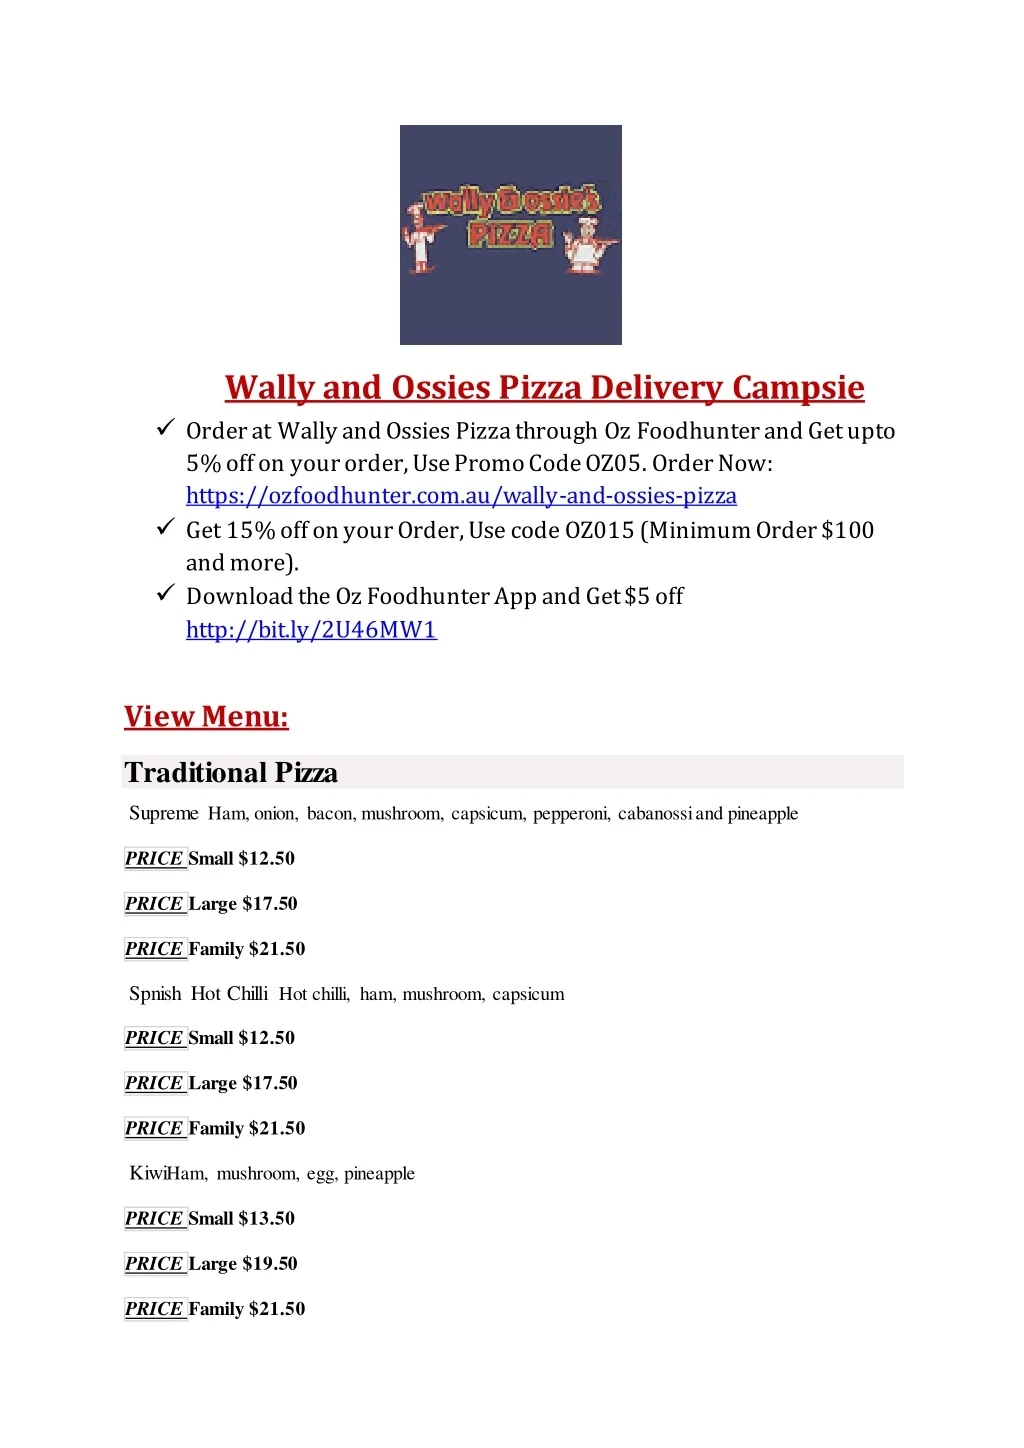 wally and ossies pizza delivery campsie order